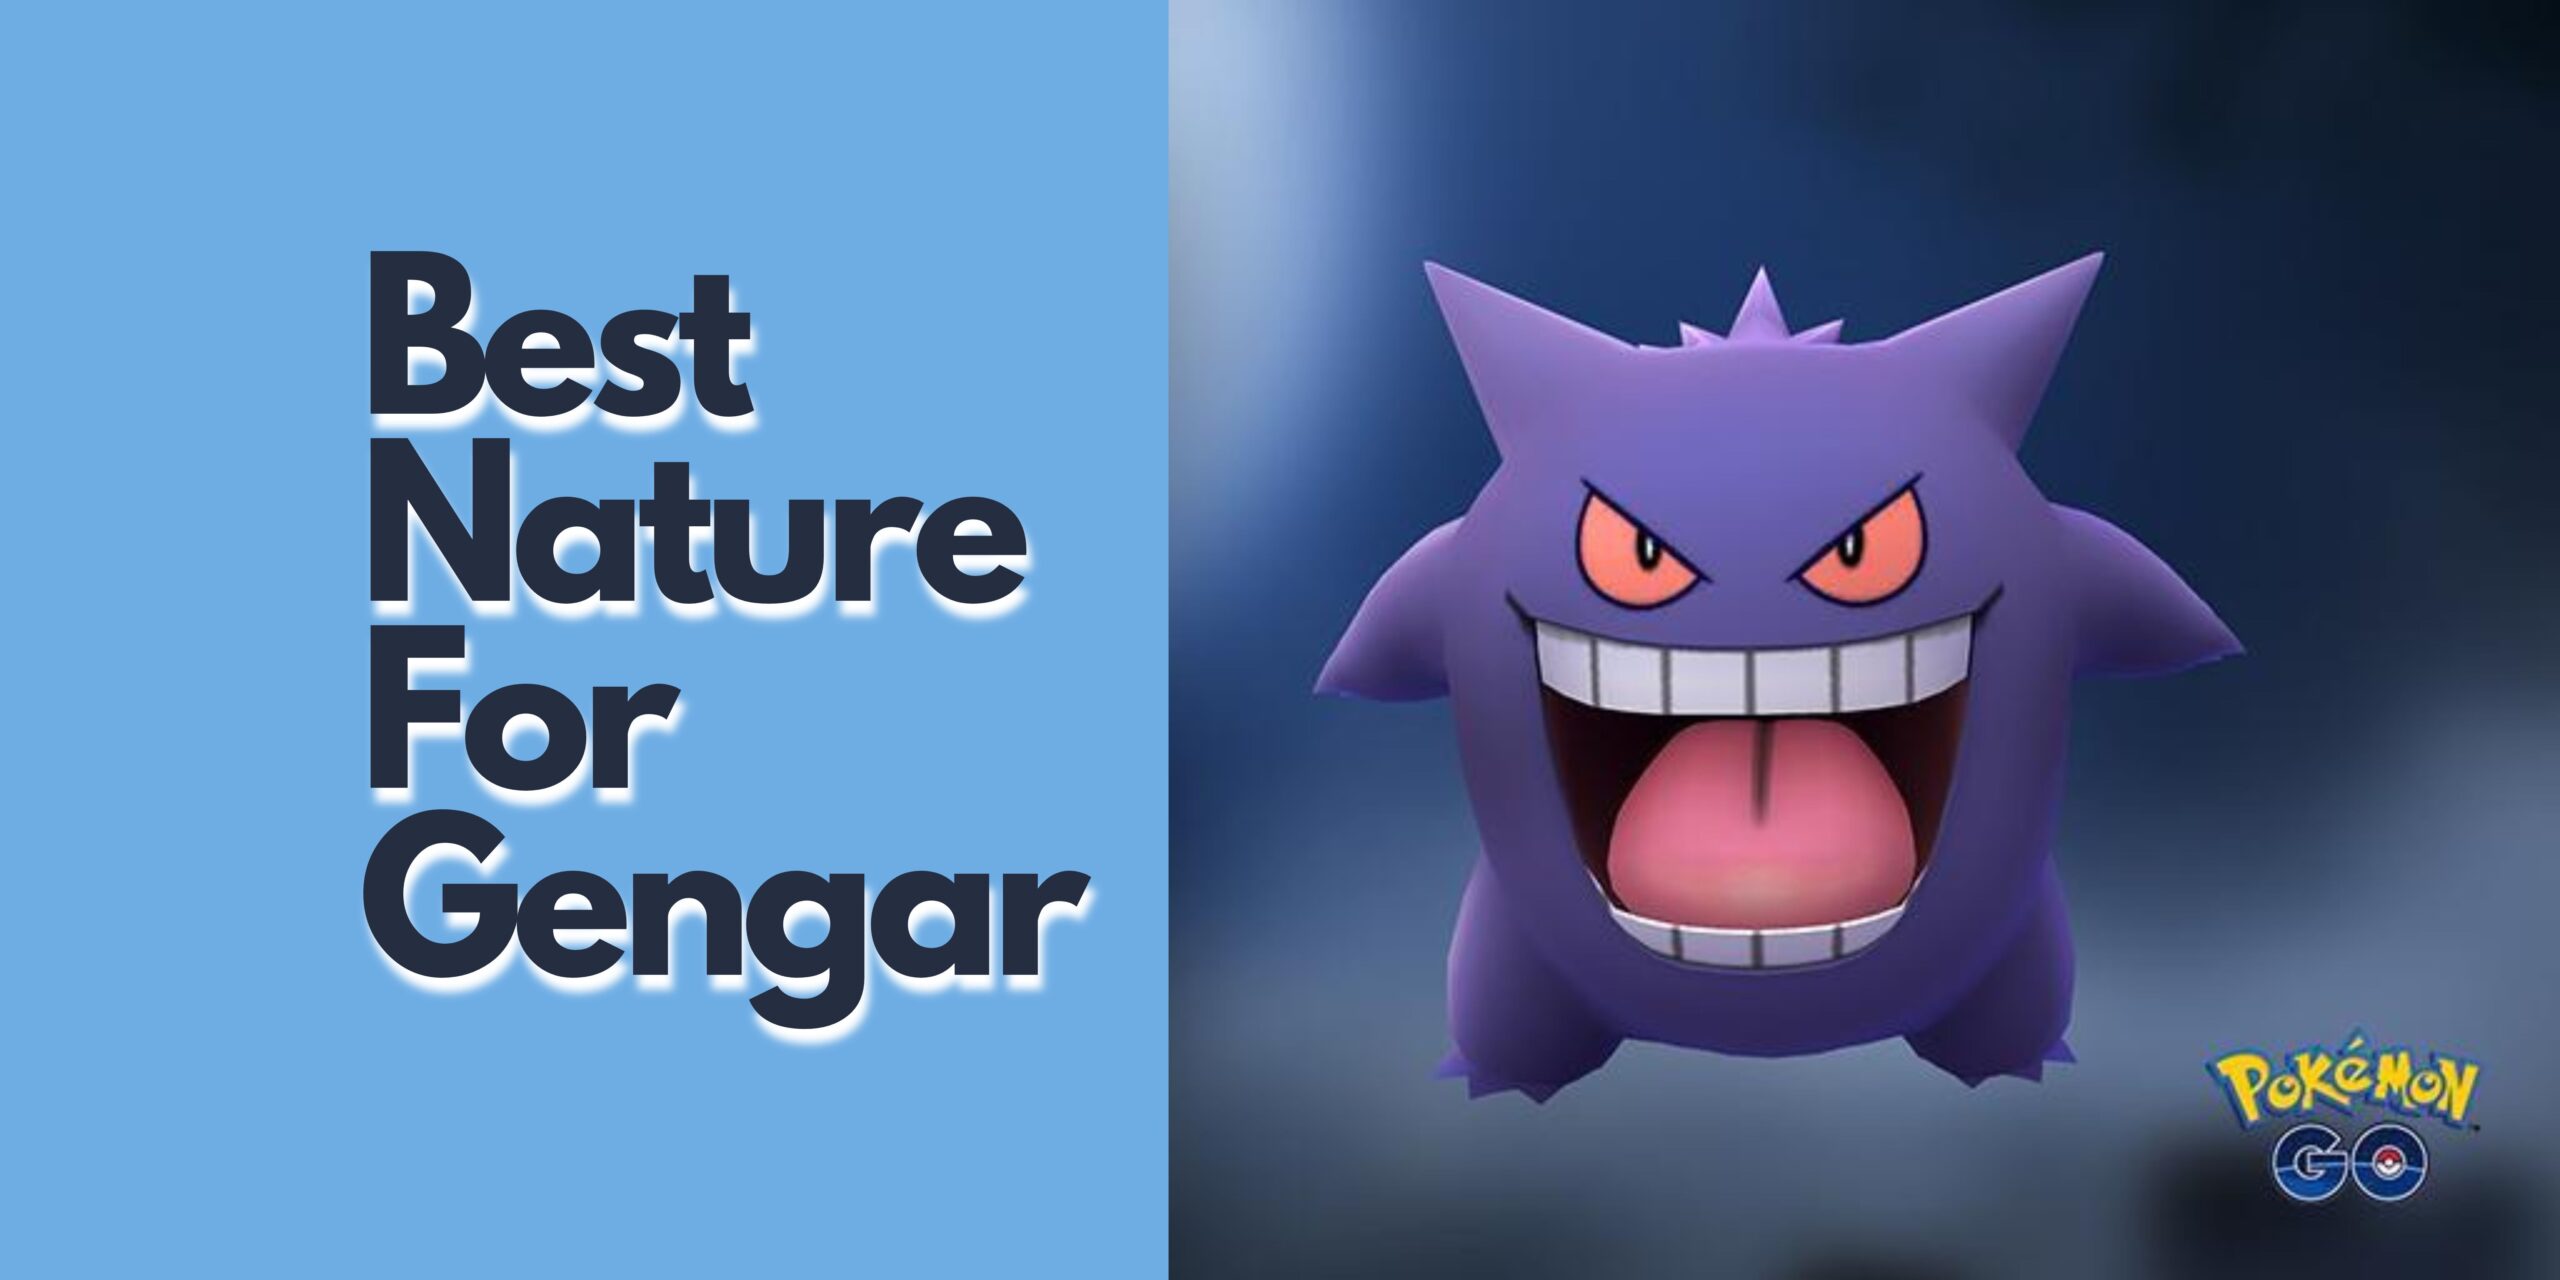 What is the best nature for gengar. Explained in details.